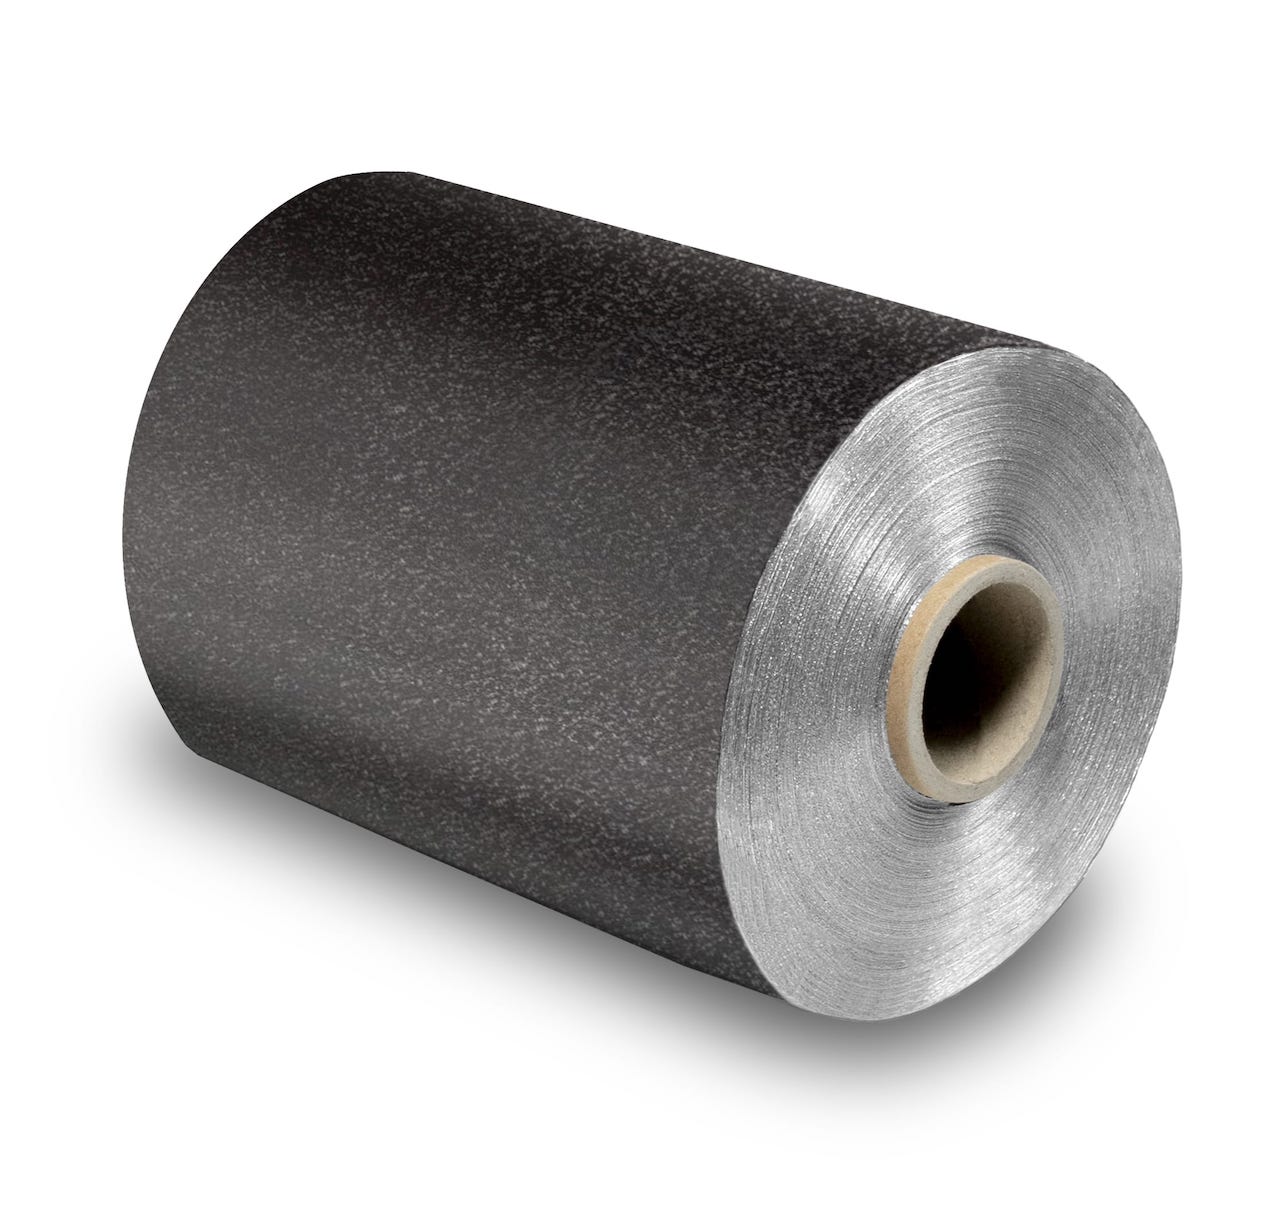 Embossed Roll - 600ft - 13 Micron - Black Stone